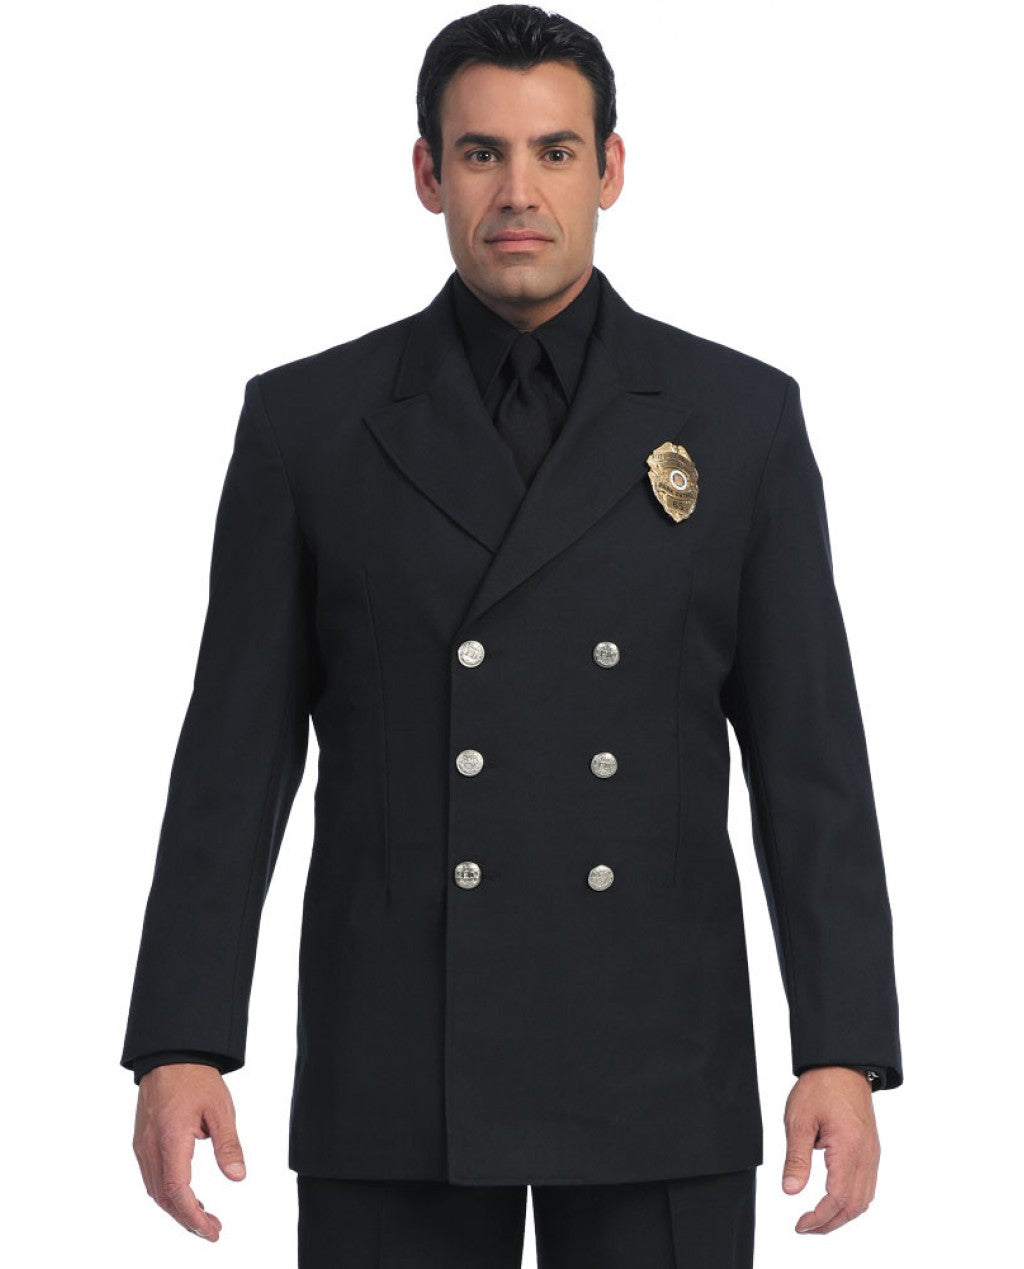 United Uniforms Double Breasted Class A Dress Coat - Polyester Elastique Weave